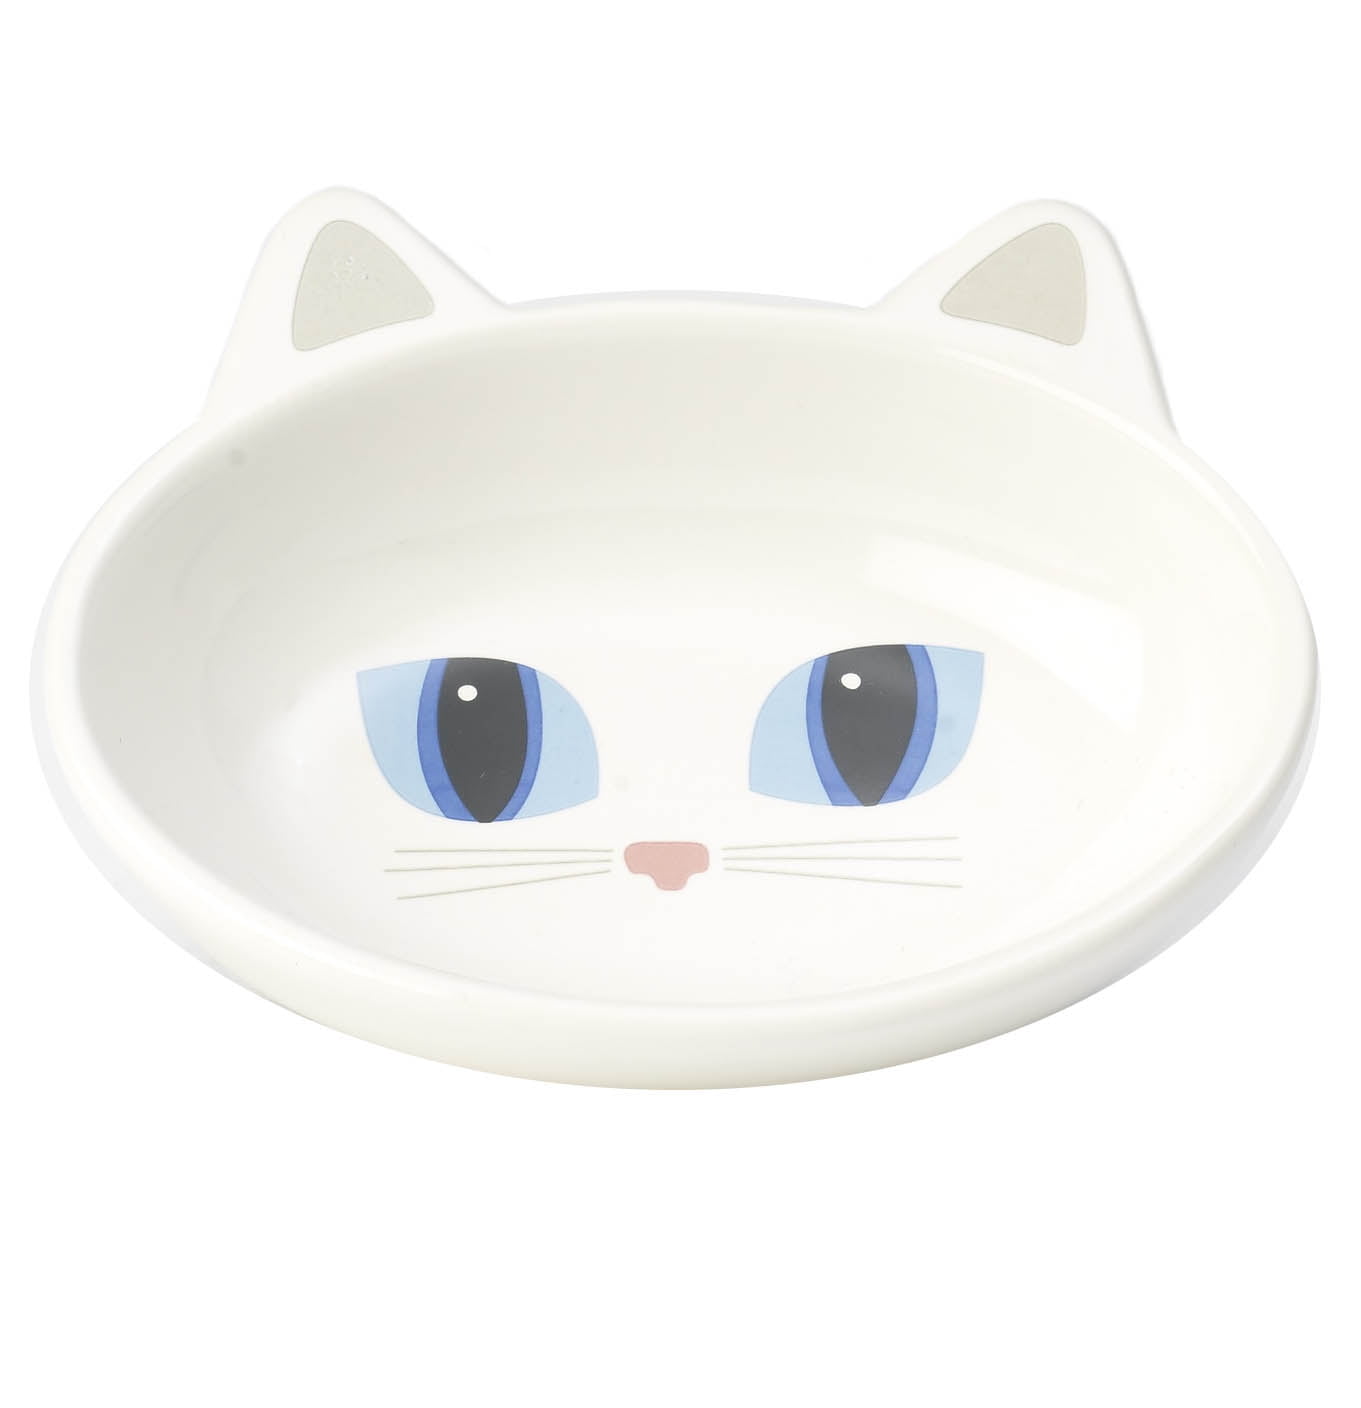 Oval Stoneware Cat Bowl 5.5-Inch Wide and 1.5-Inch Tall Saucer with 5.3-Ounce Capacity Black